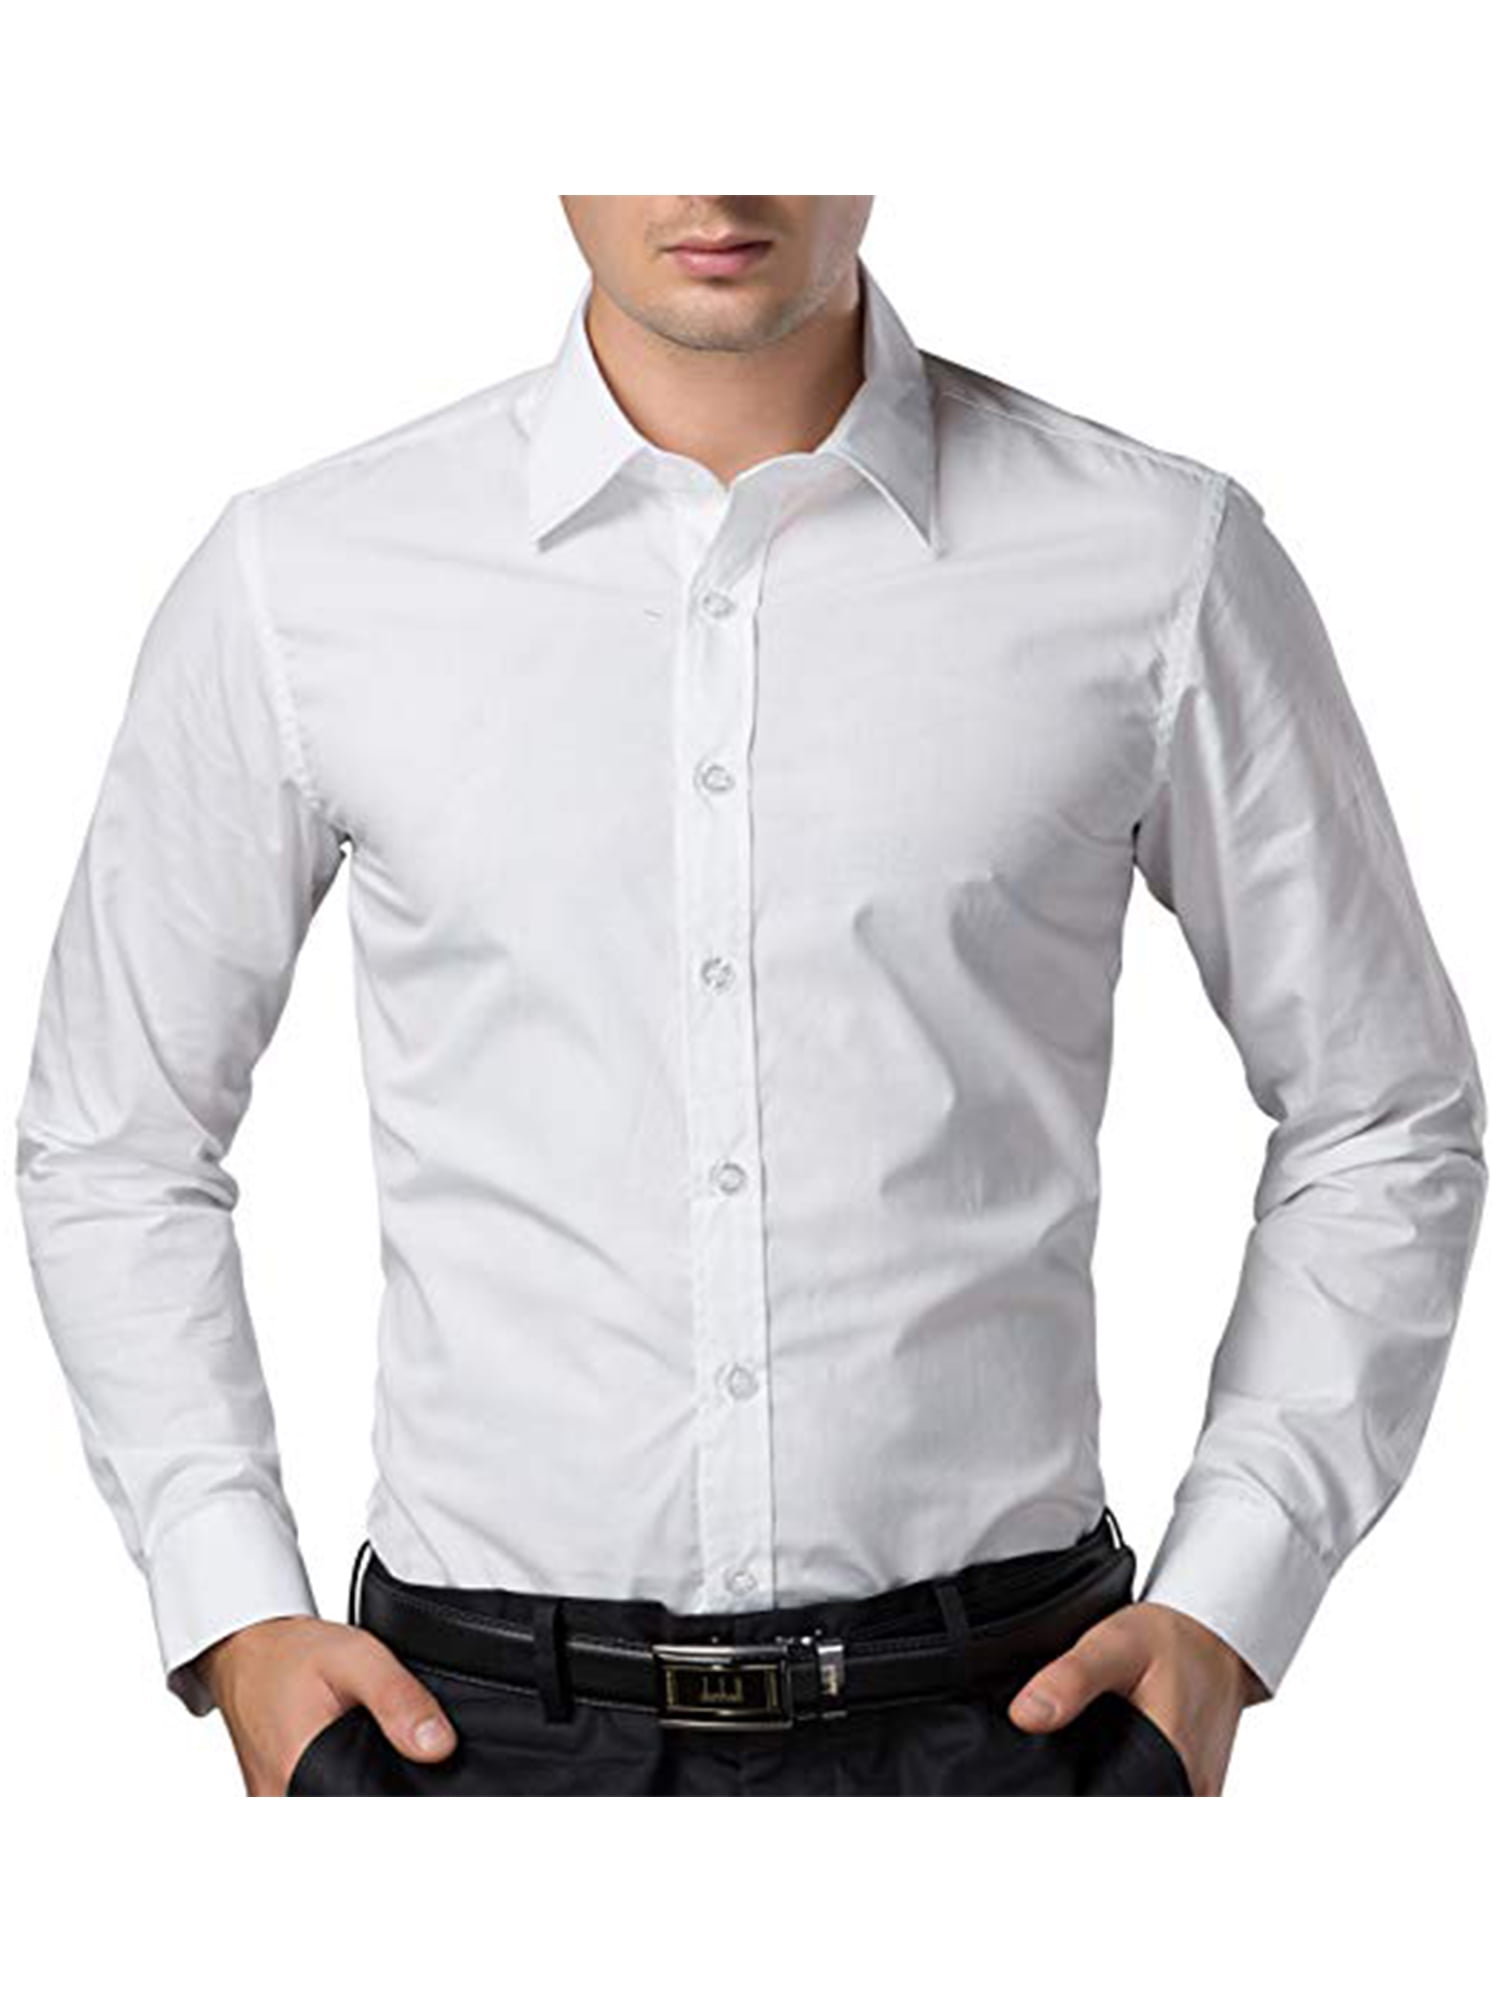 Slim Fit White Dress Shirt With Black Buttons | lupon.gov.ph